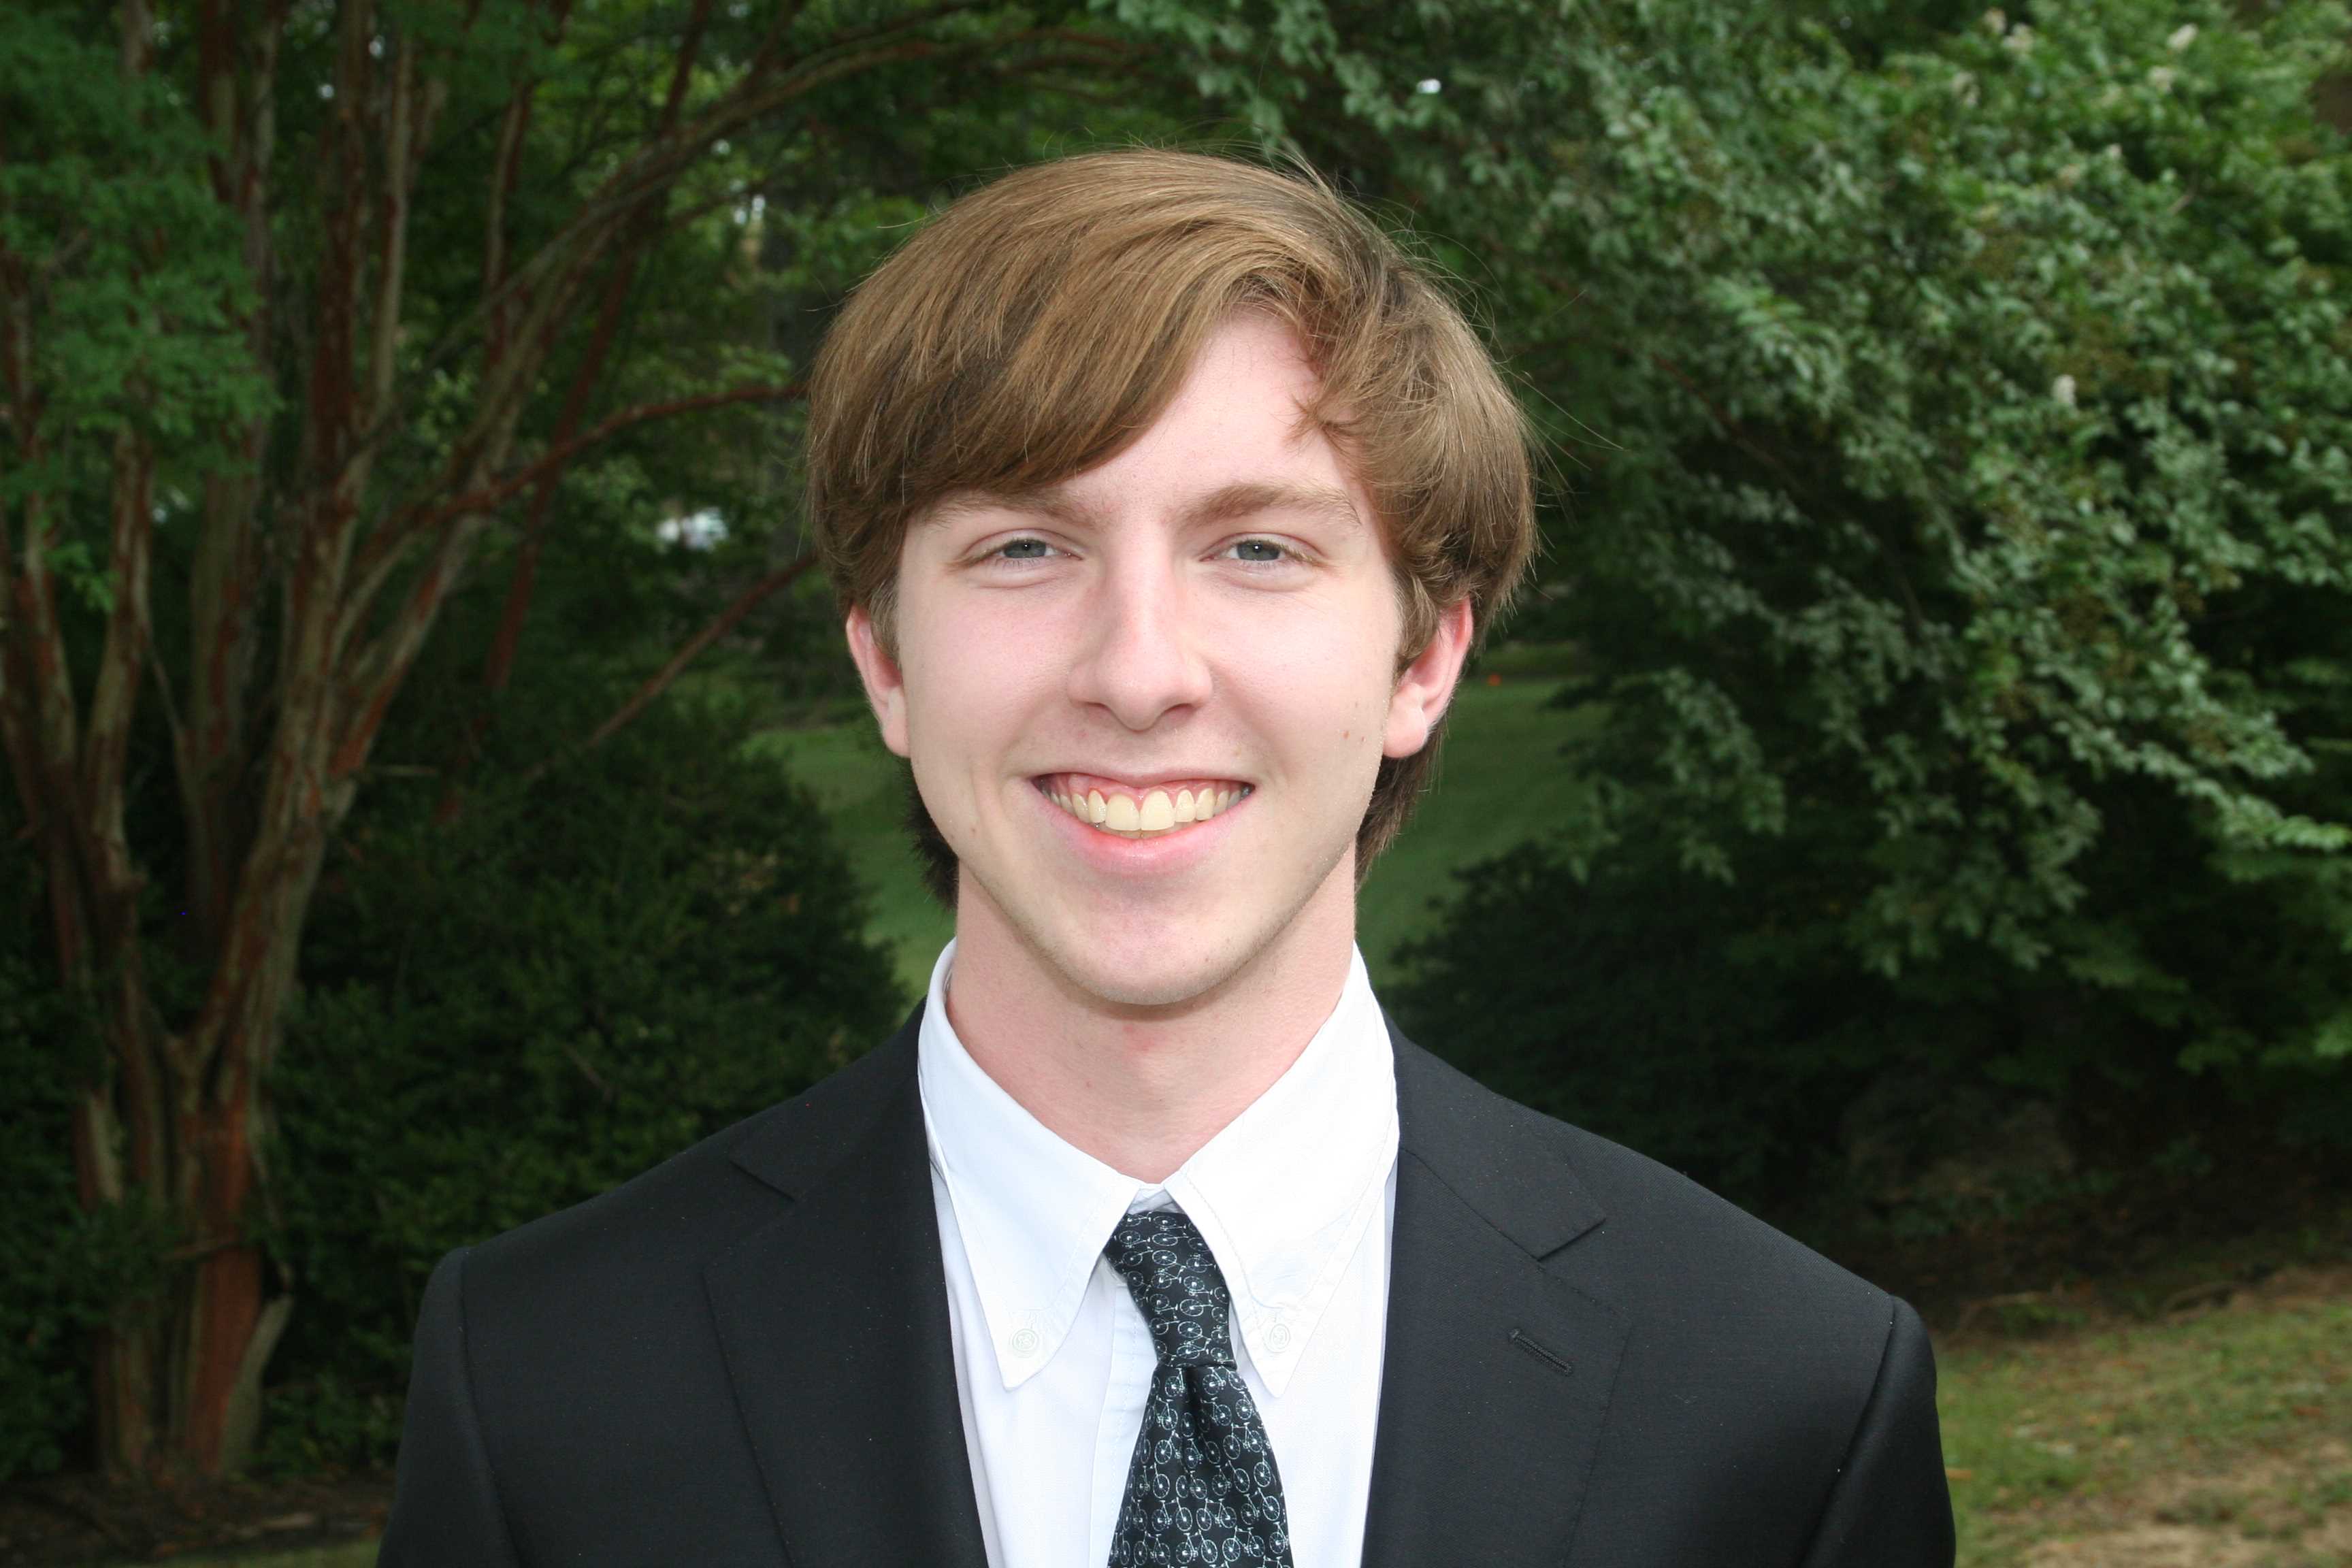 SDS Alumnus Earns Perfect ACT Score & Earns National Merit Recognition